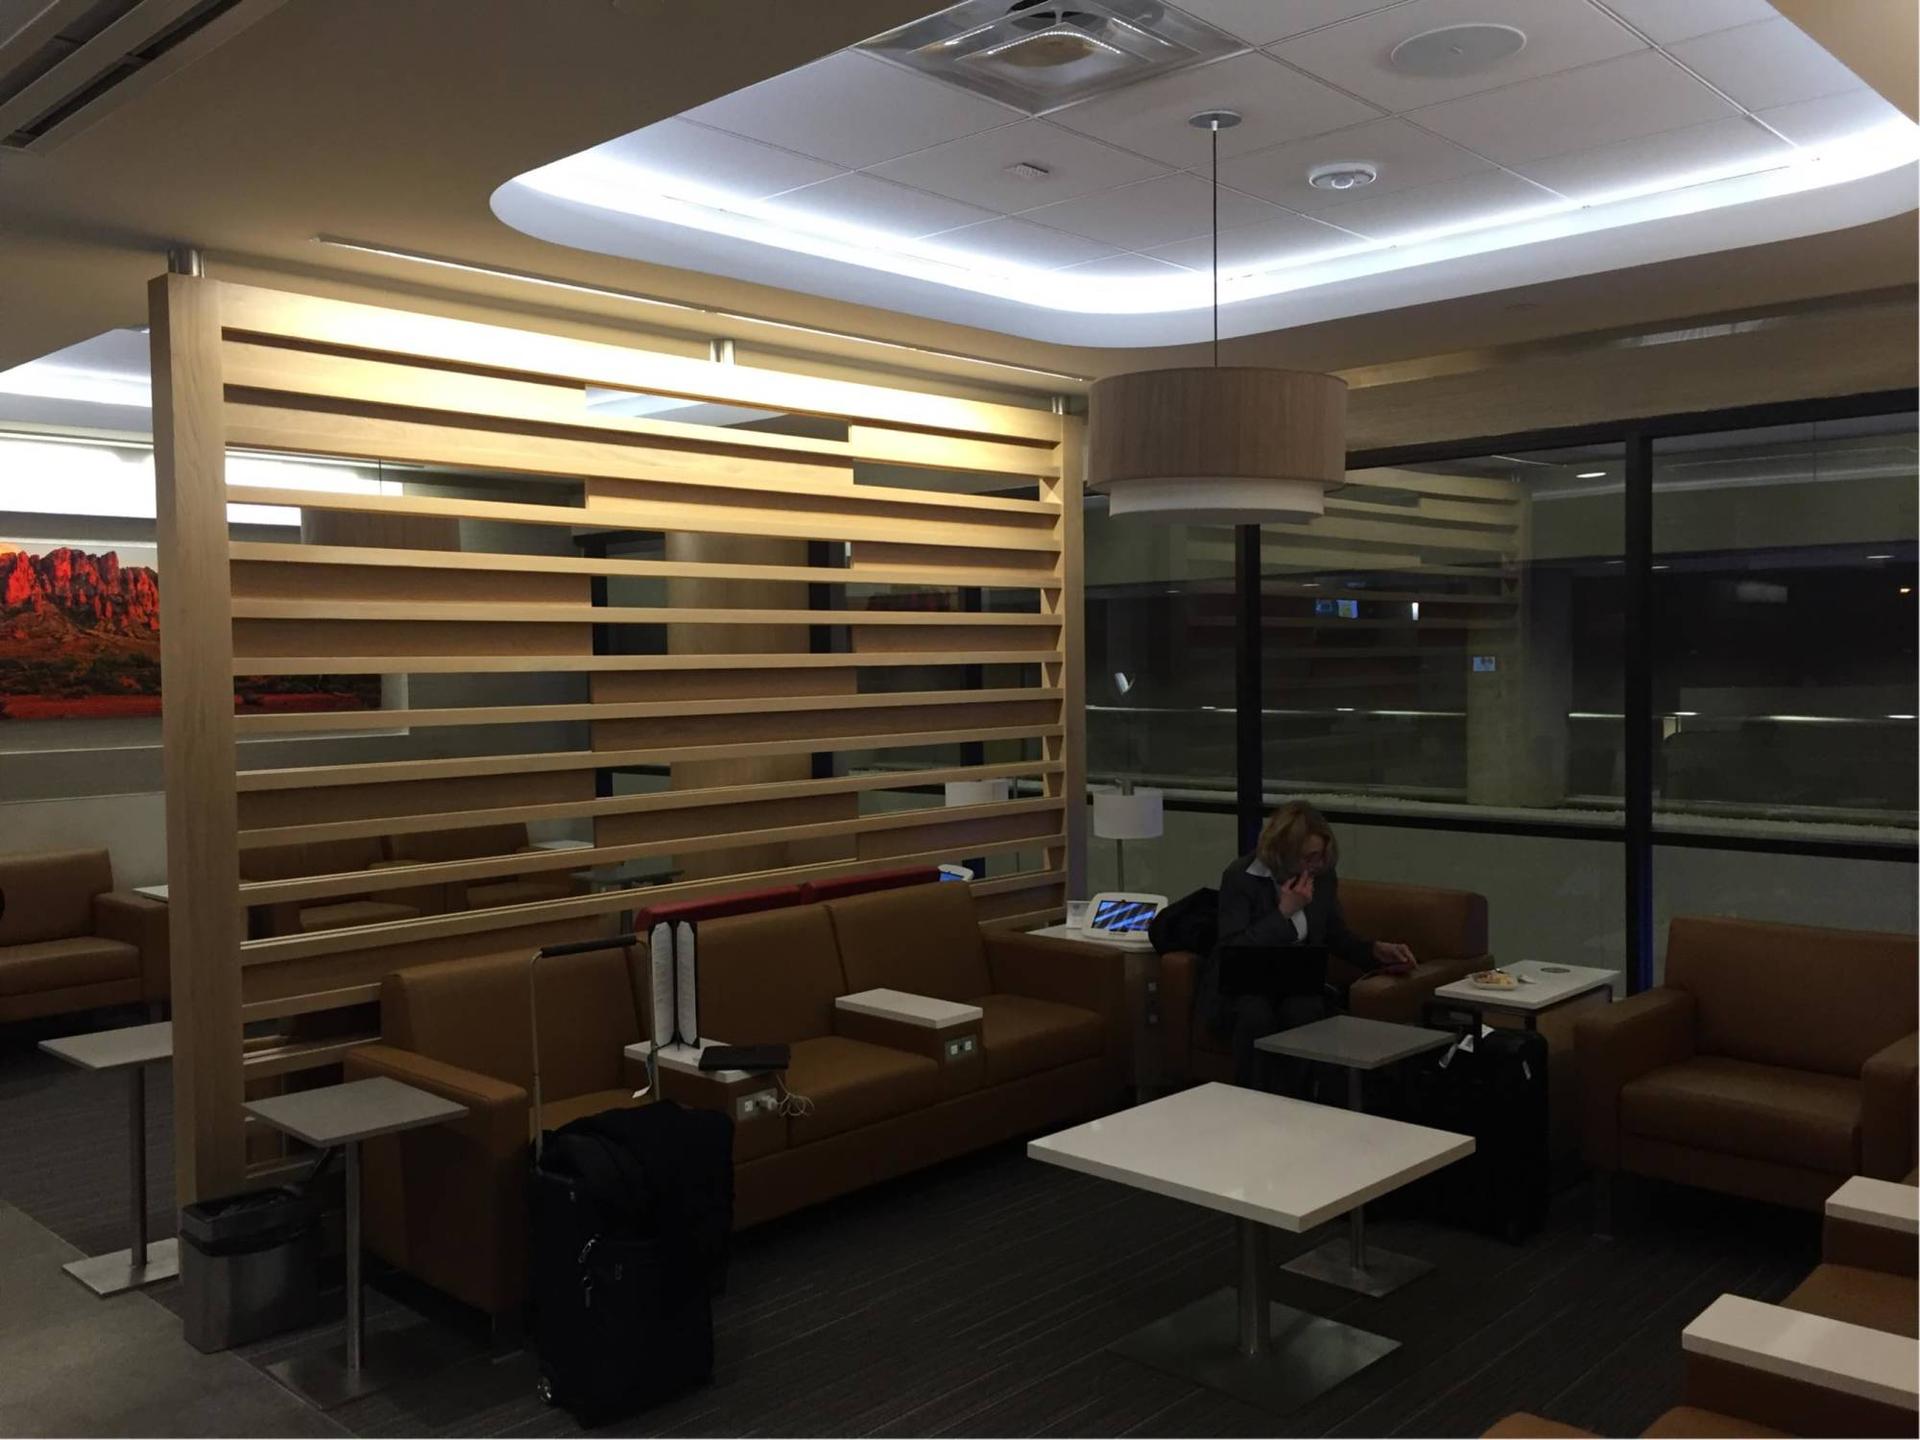 American Airlines Admirals Club (Gate A7) image 13 of 25